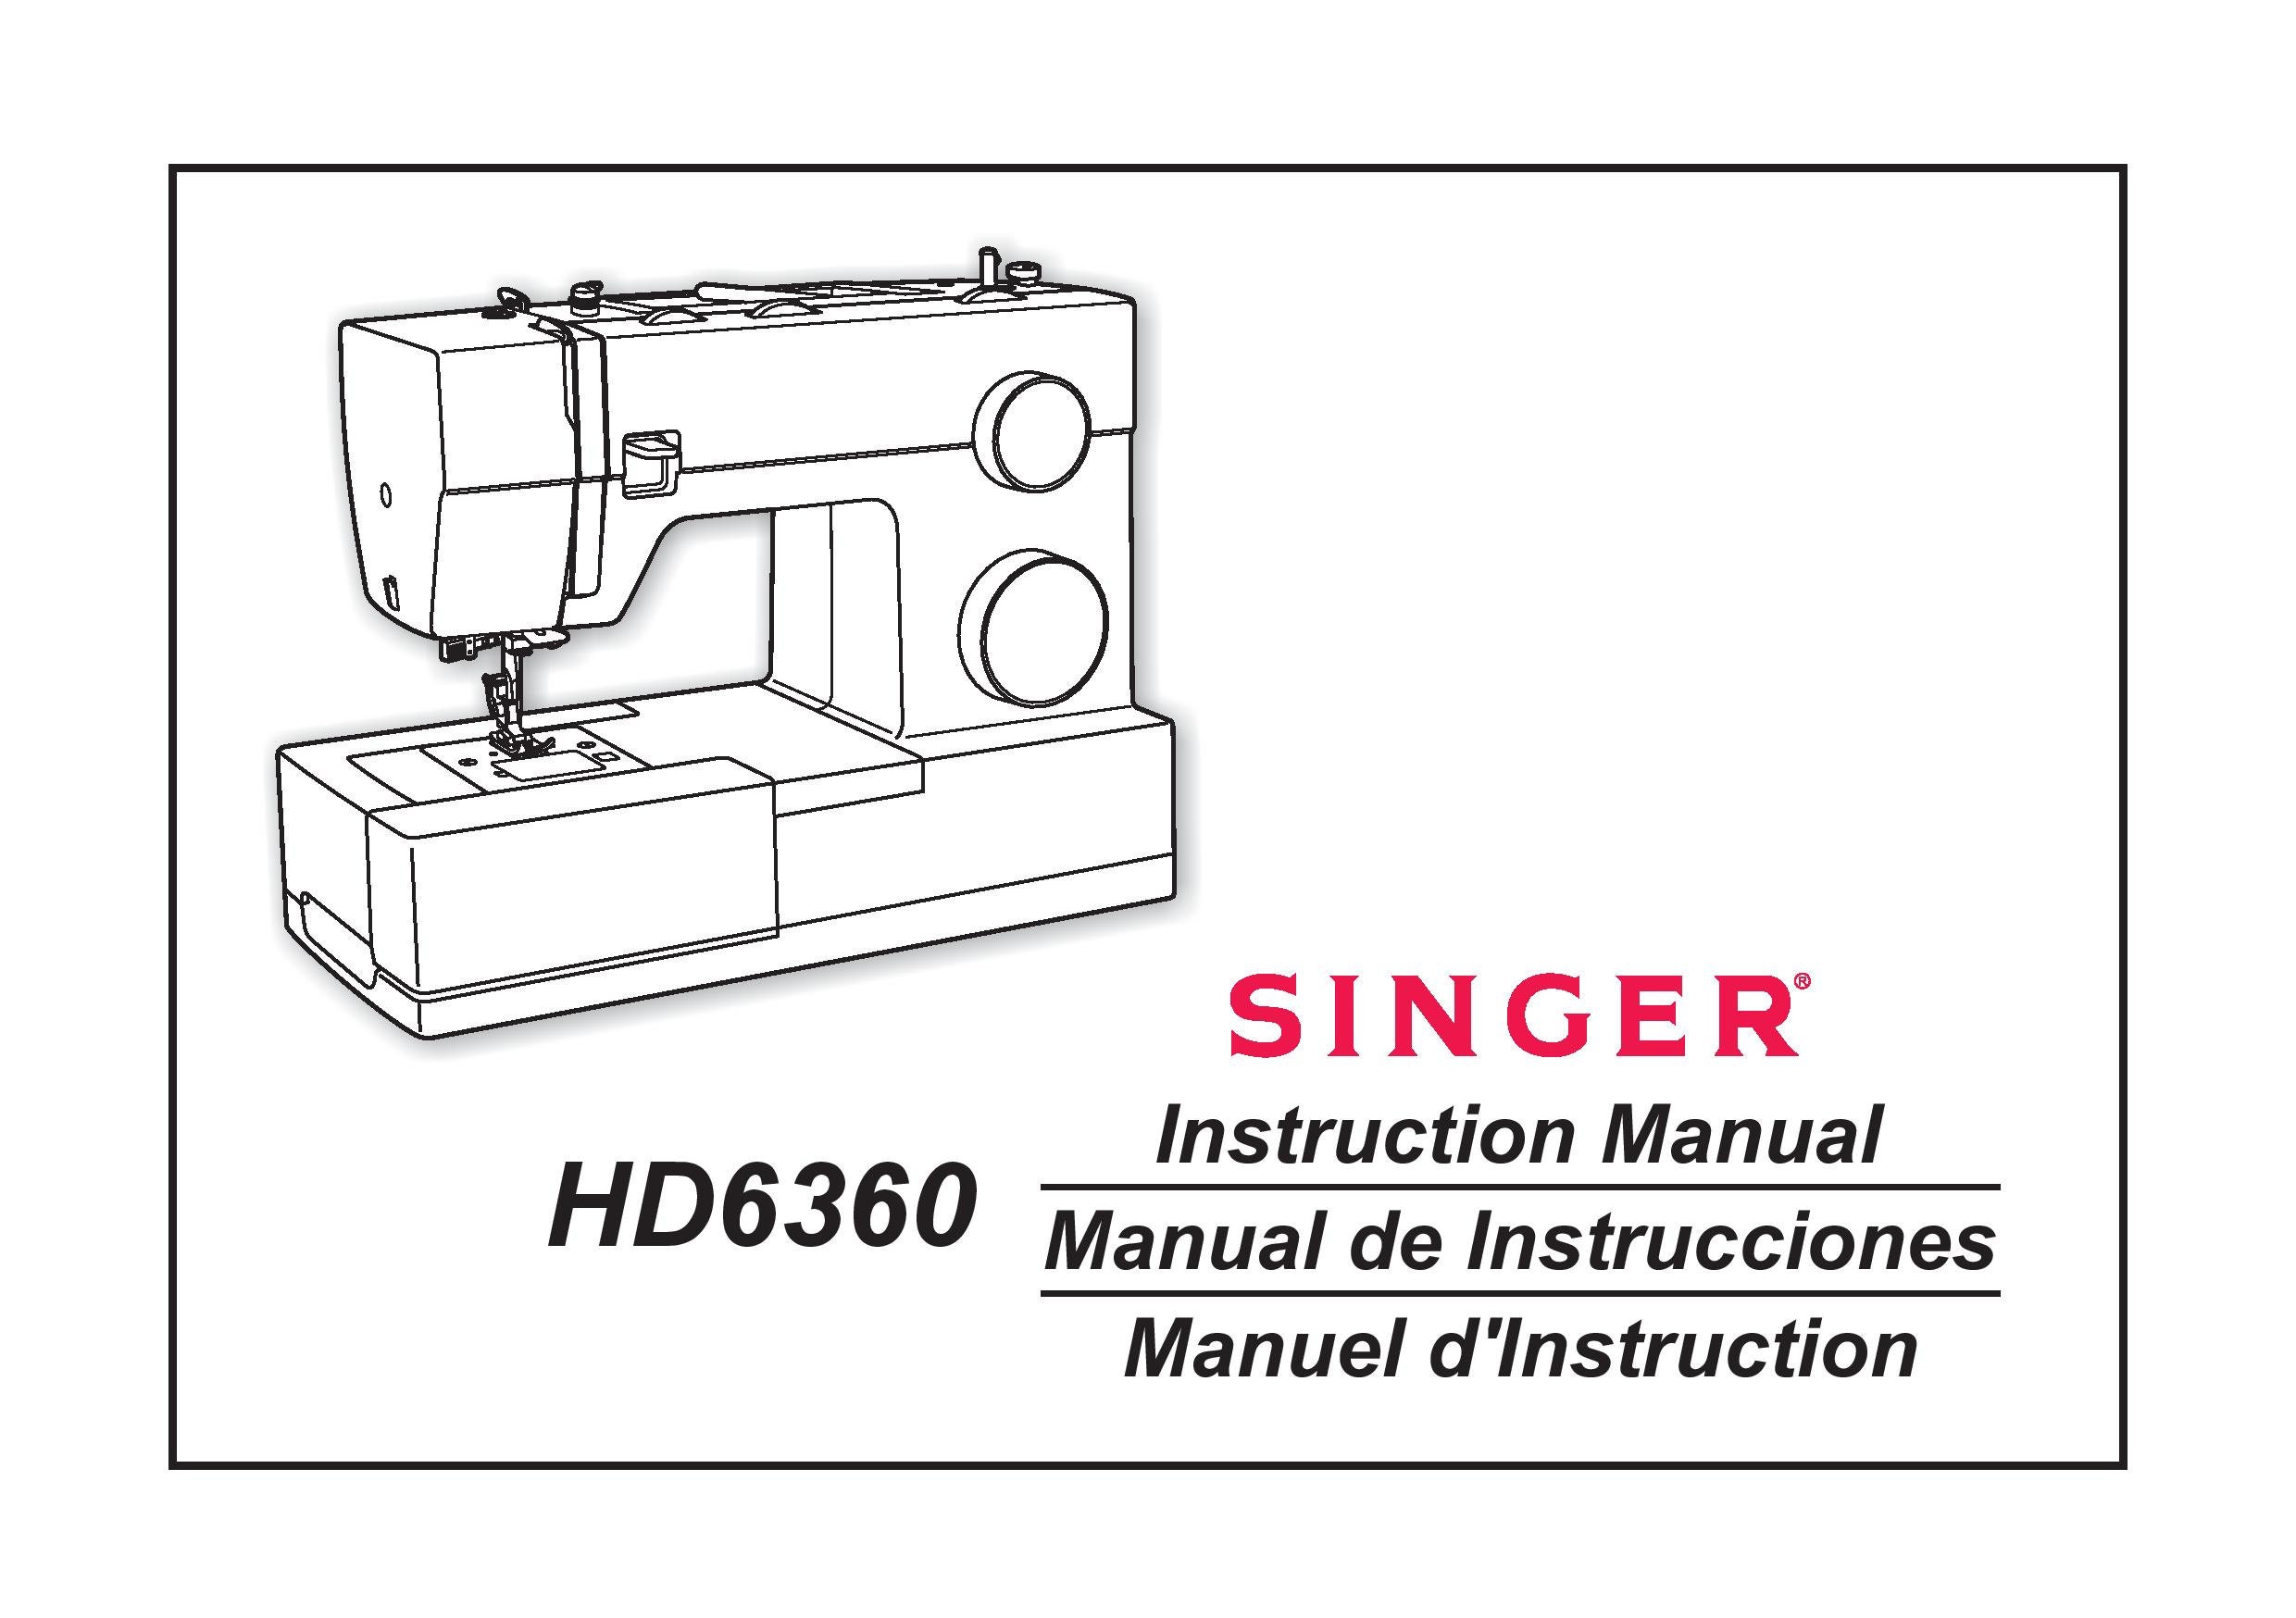 Singer HD6360 Sewing Machine Instruction Manual User Manual Adult Picture